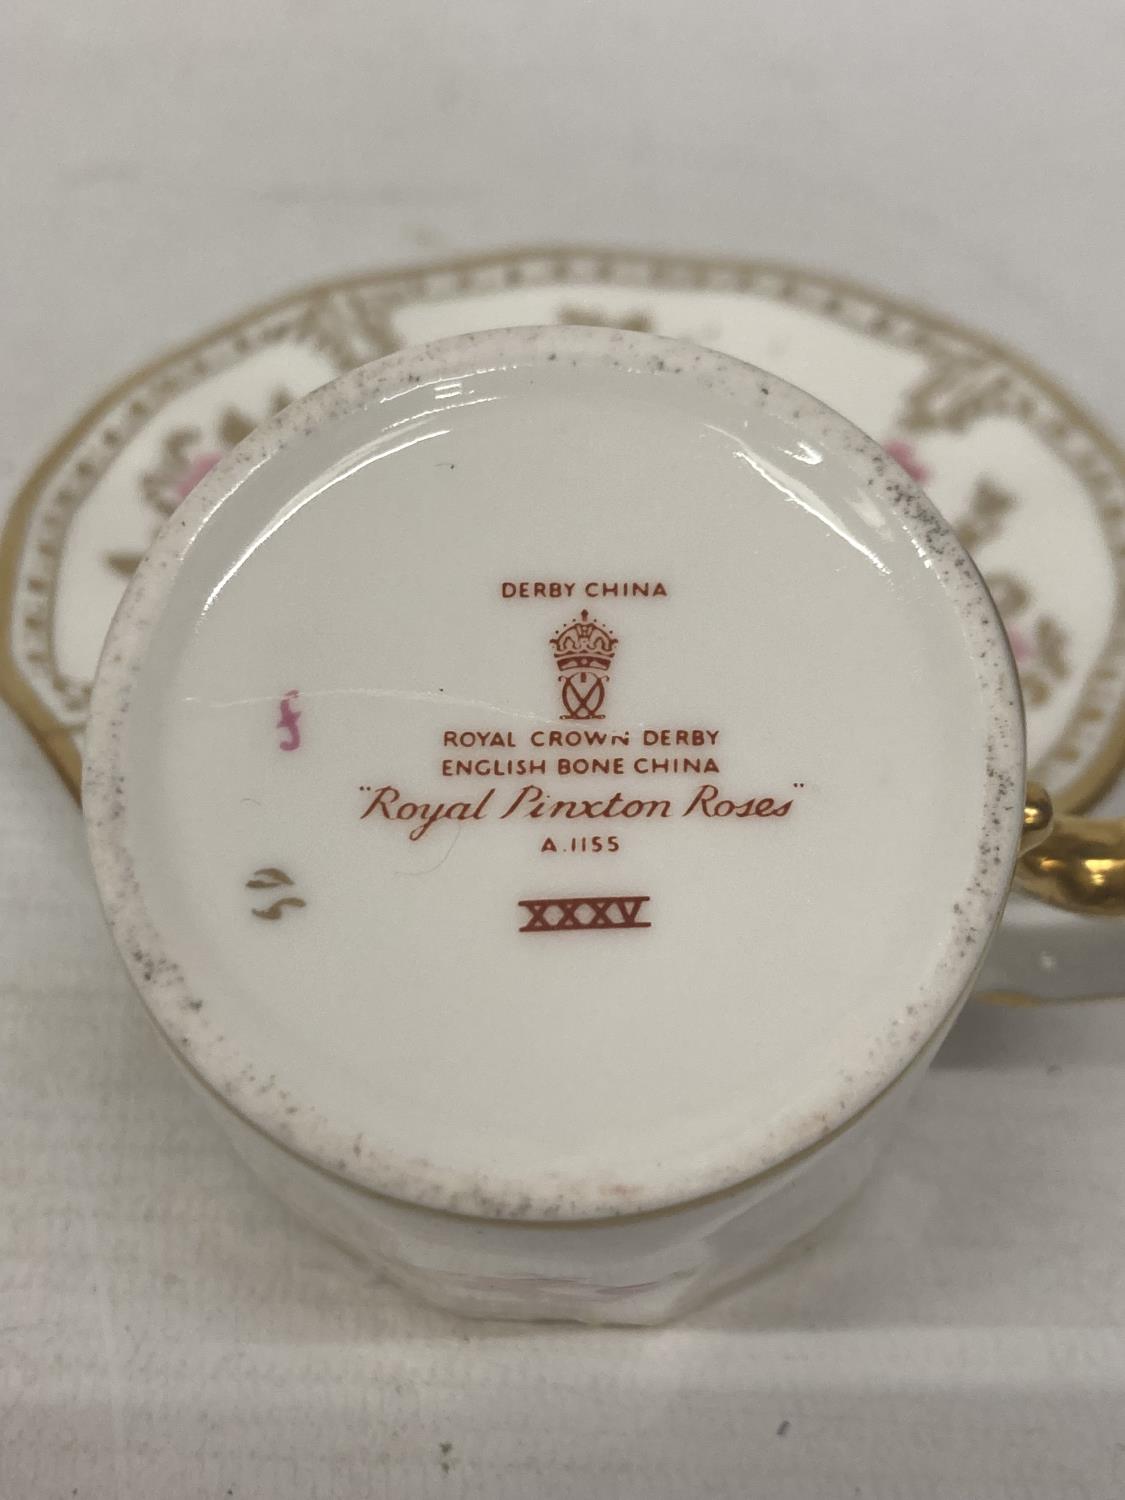 A ROYAL CROWN DERBY PINXTON ROSES COFFEE CAN AND SAUCER TOGETHER WITH A ROYAL CROWN DERBY TEACUP AND - Image 5 of 6